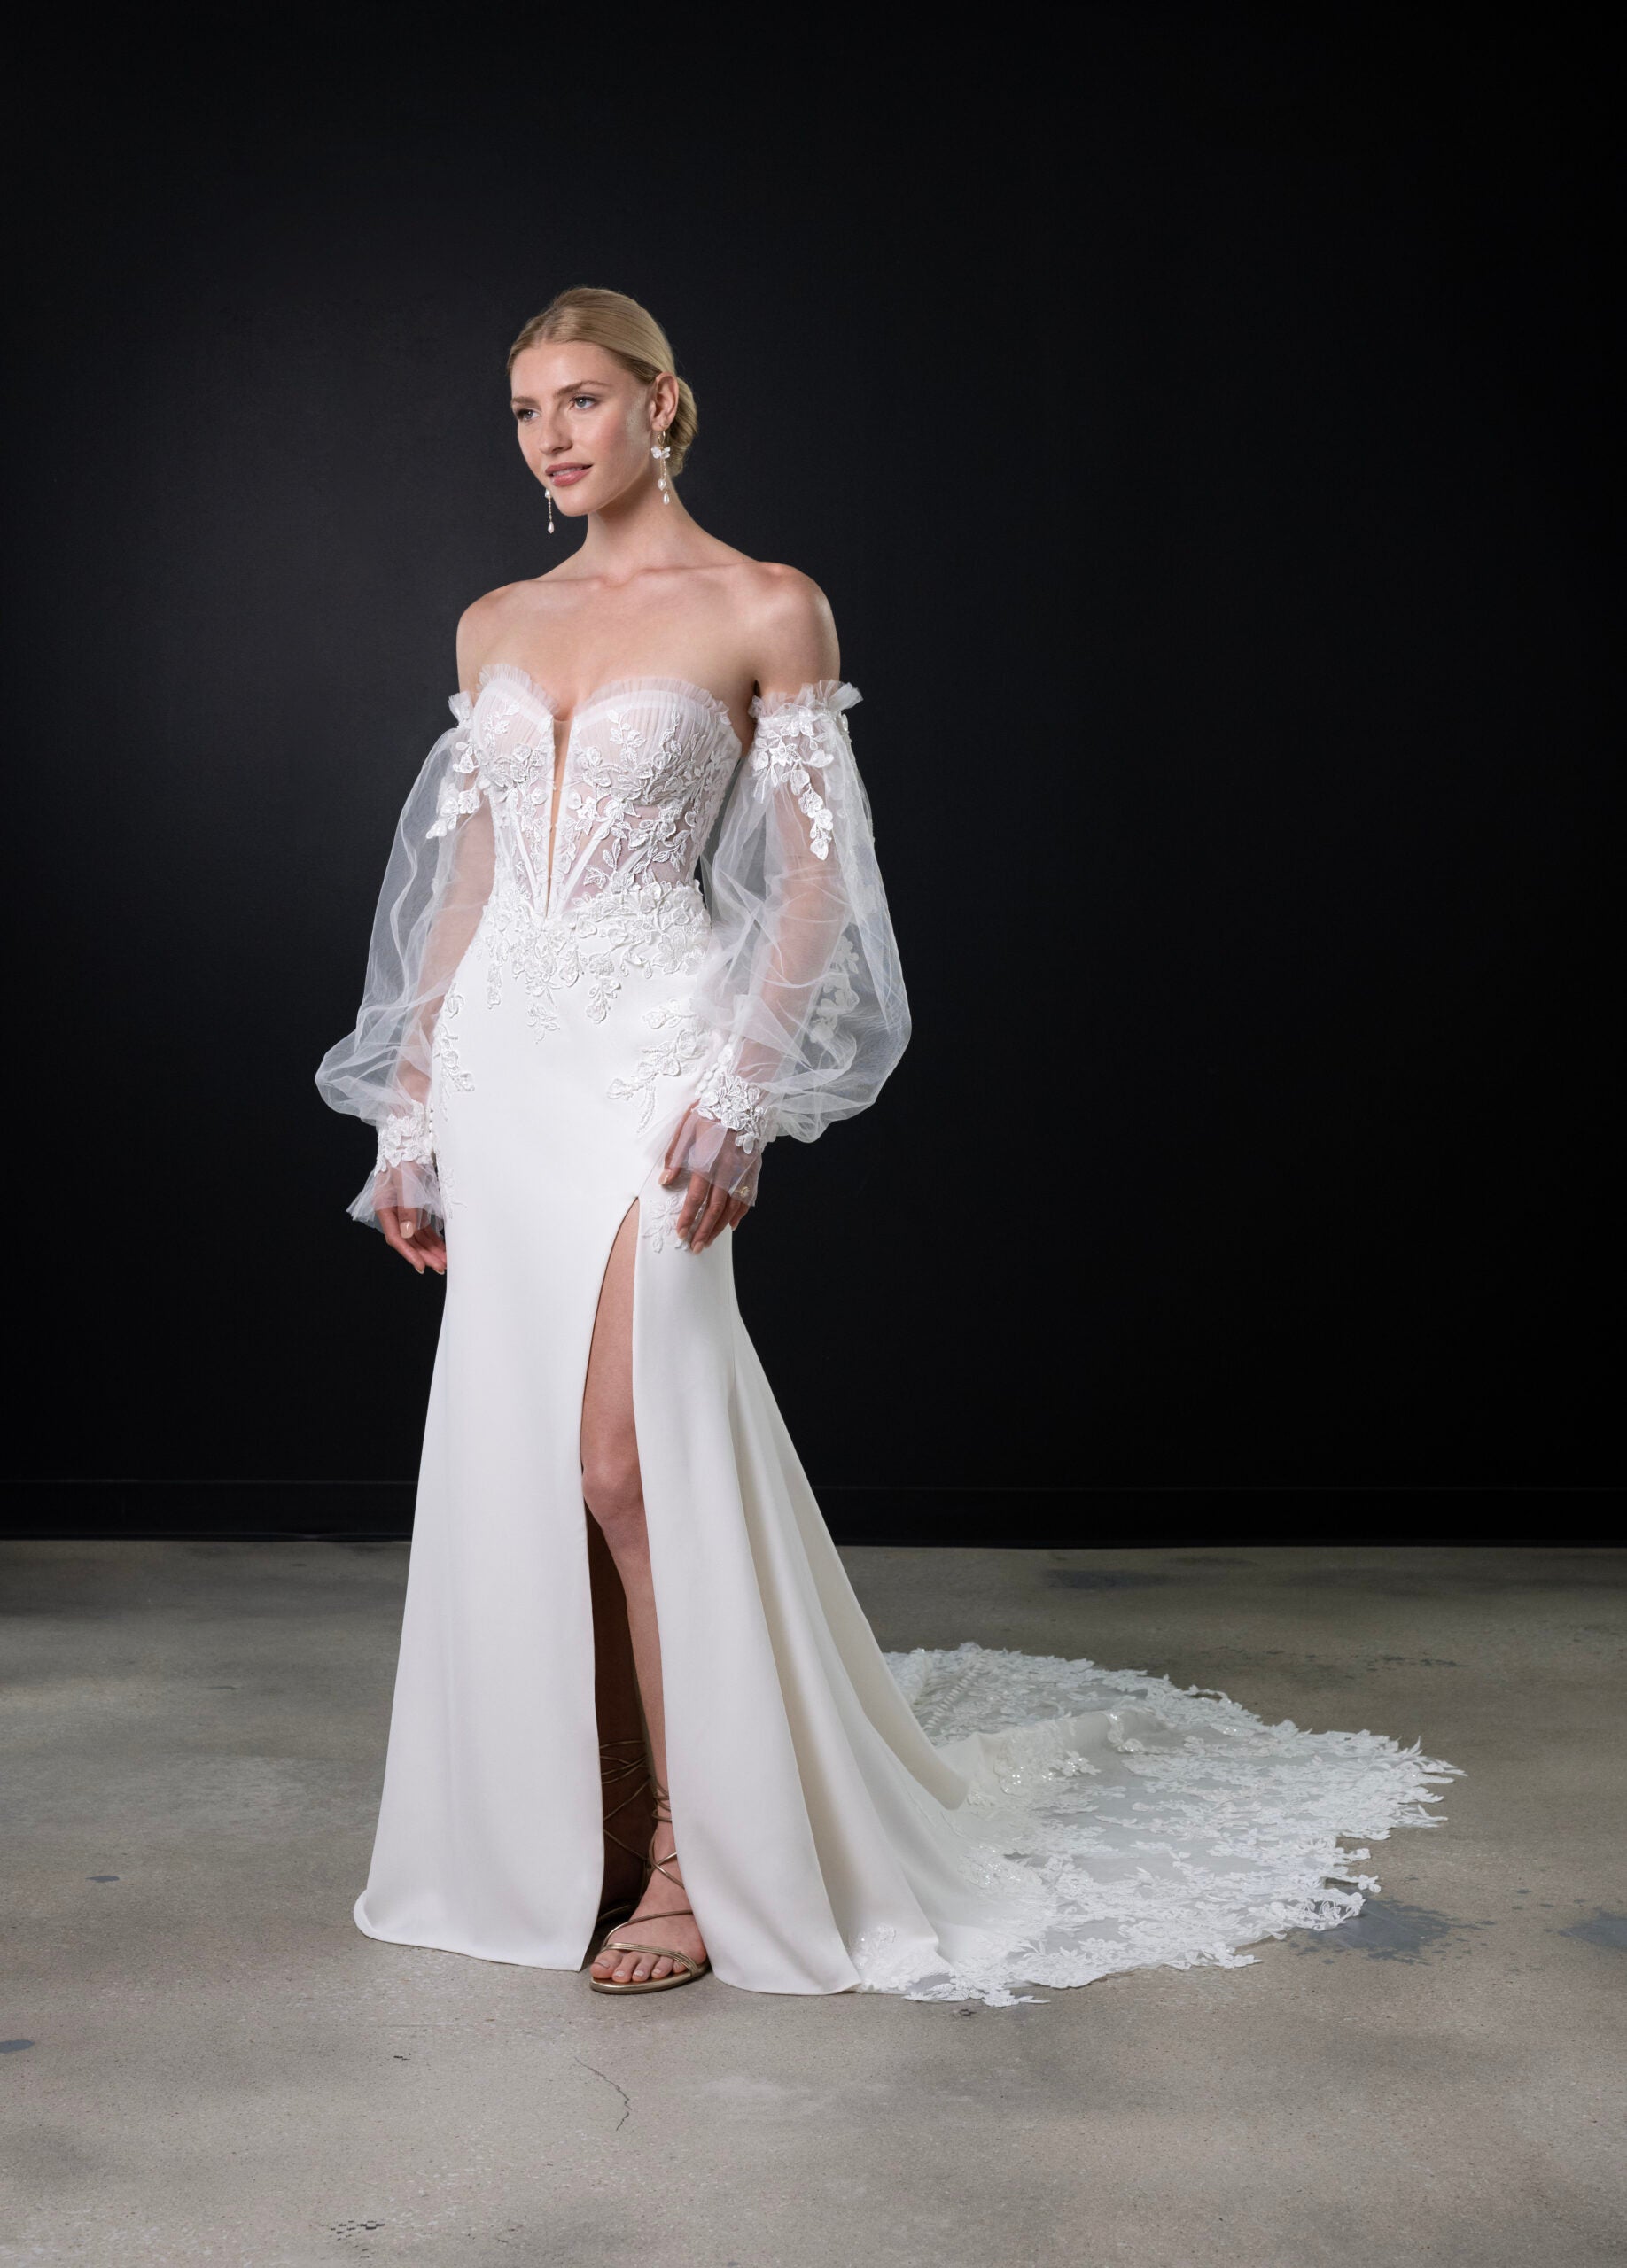 Lace And Crepe Sheath Gown With Detachable Puff Sleeves by Martina Liana - Image 1